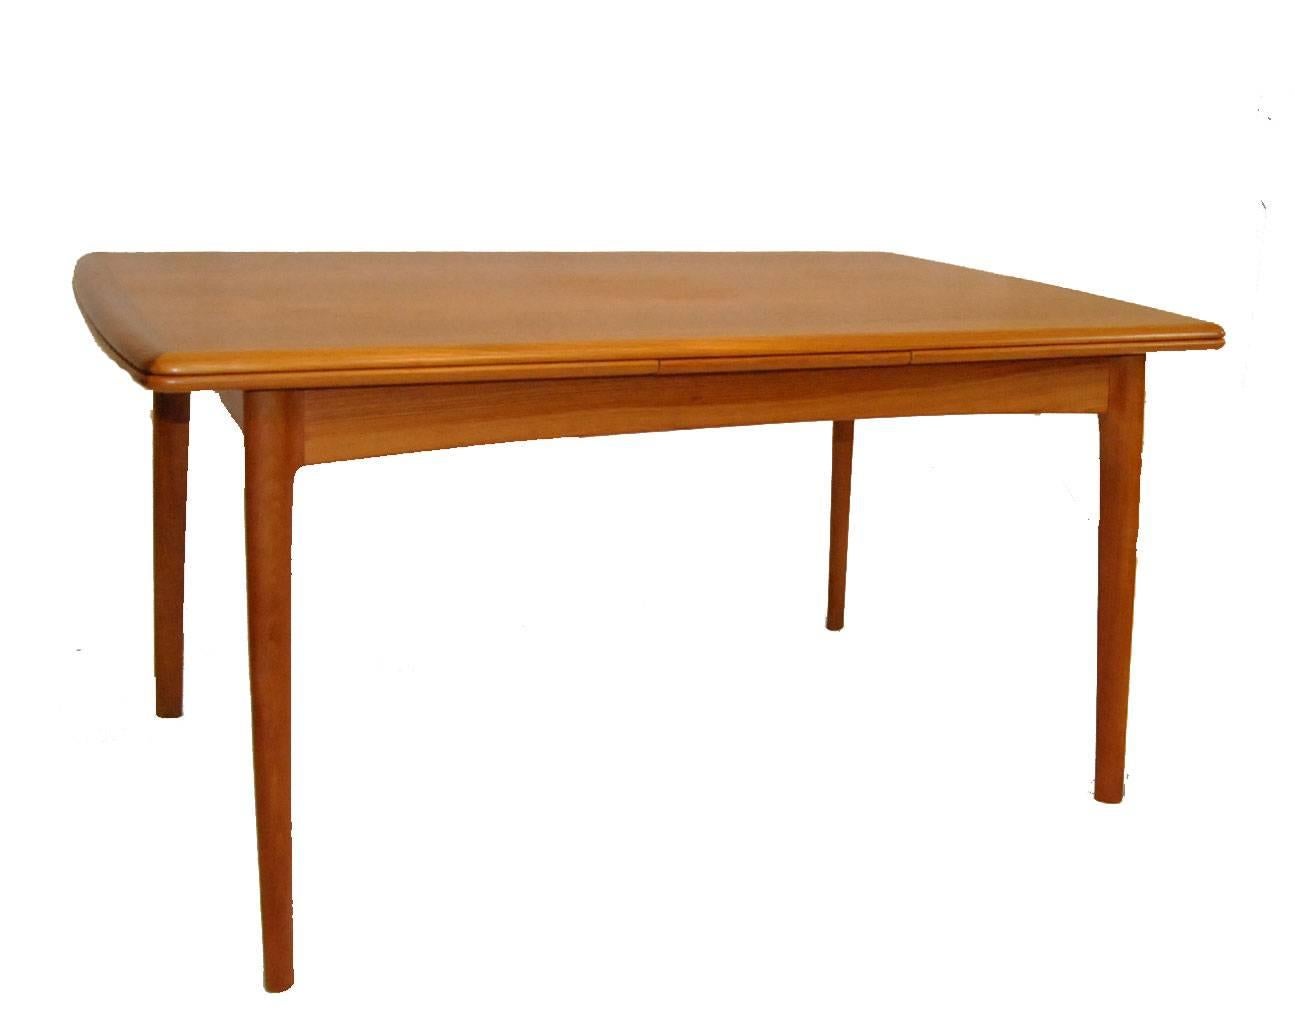 A beautiful Danish Modern teak dining table and chairs by Hornslet Kofoed. The set includes a refractory table and six "Liz" chairs by Hornslet Kofoed (two arms and four side chairs). The refractory table is 36" wide by 57" long